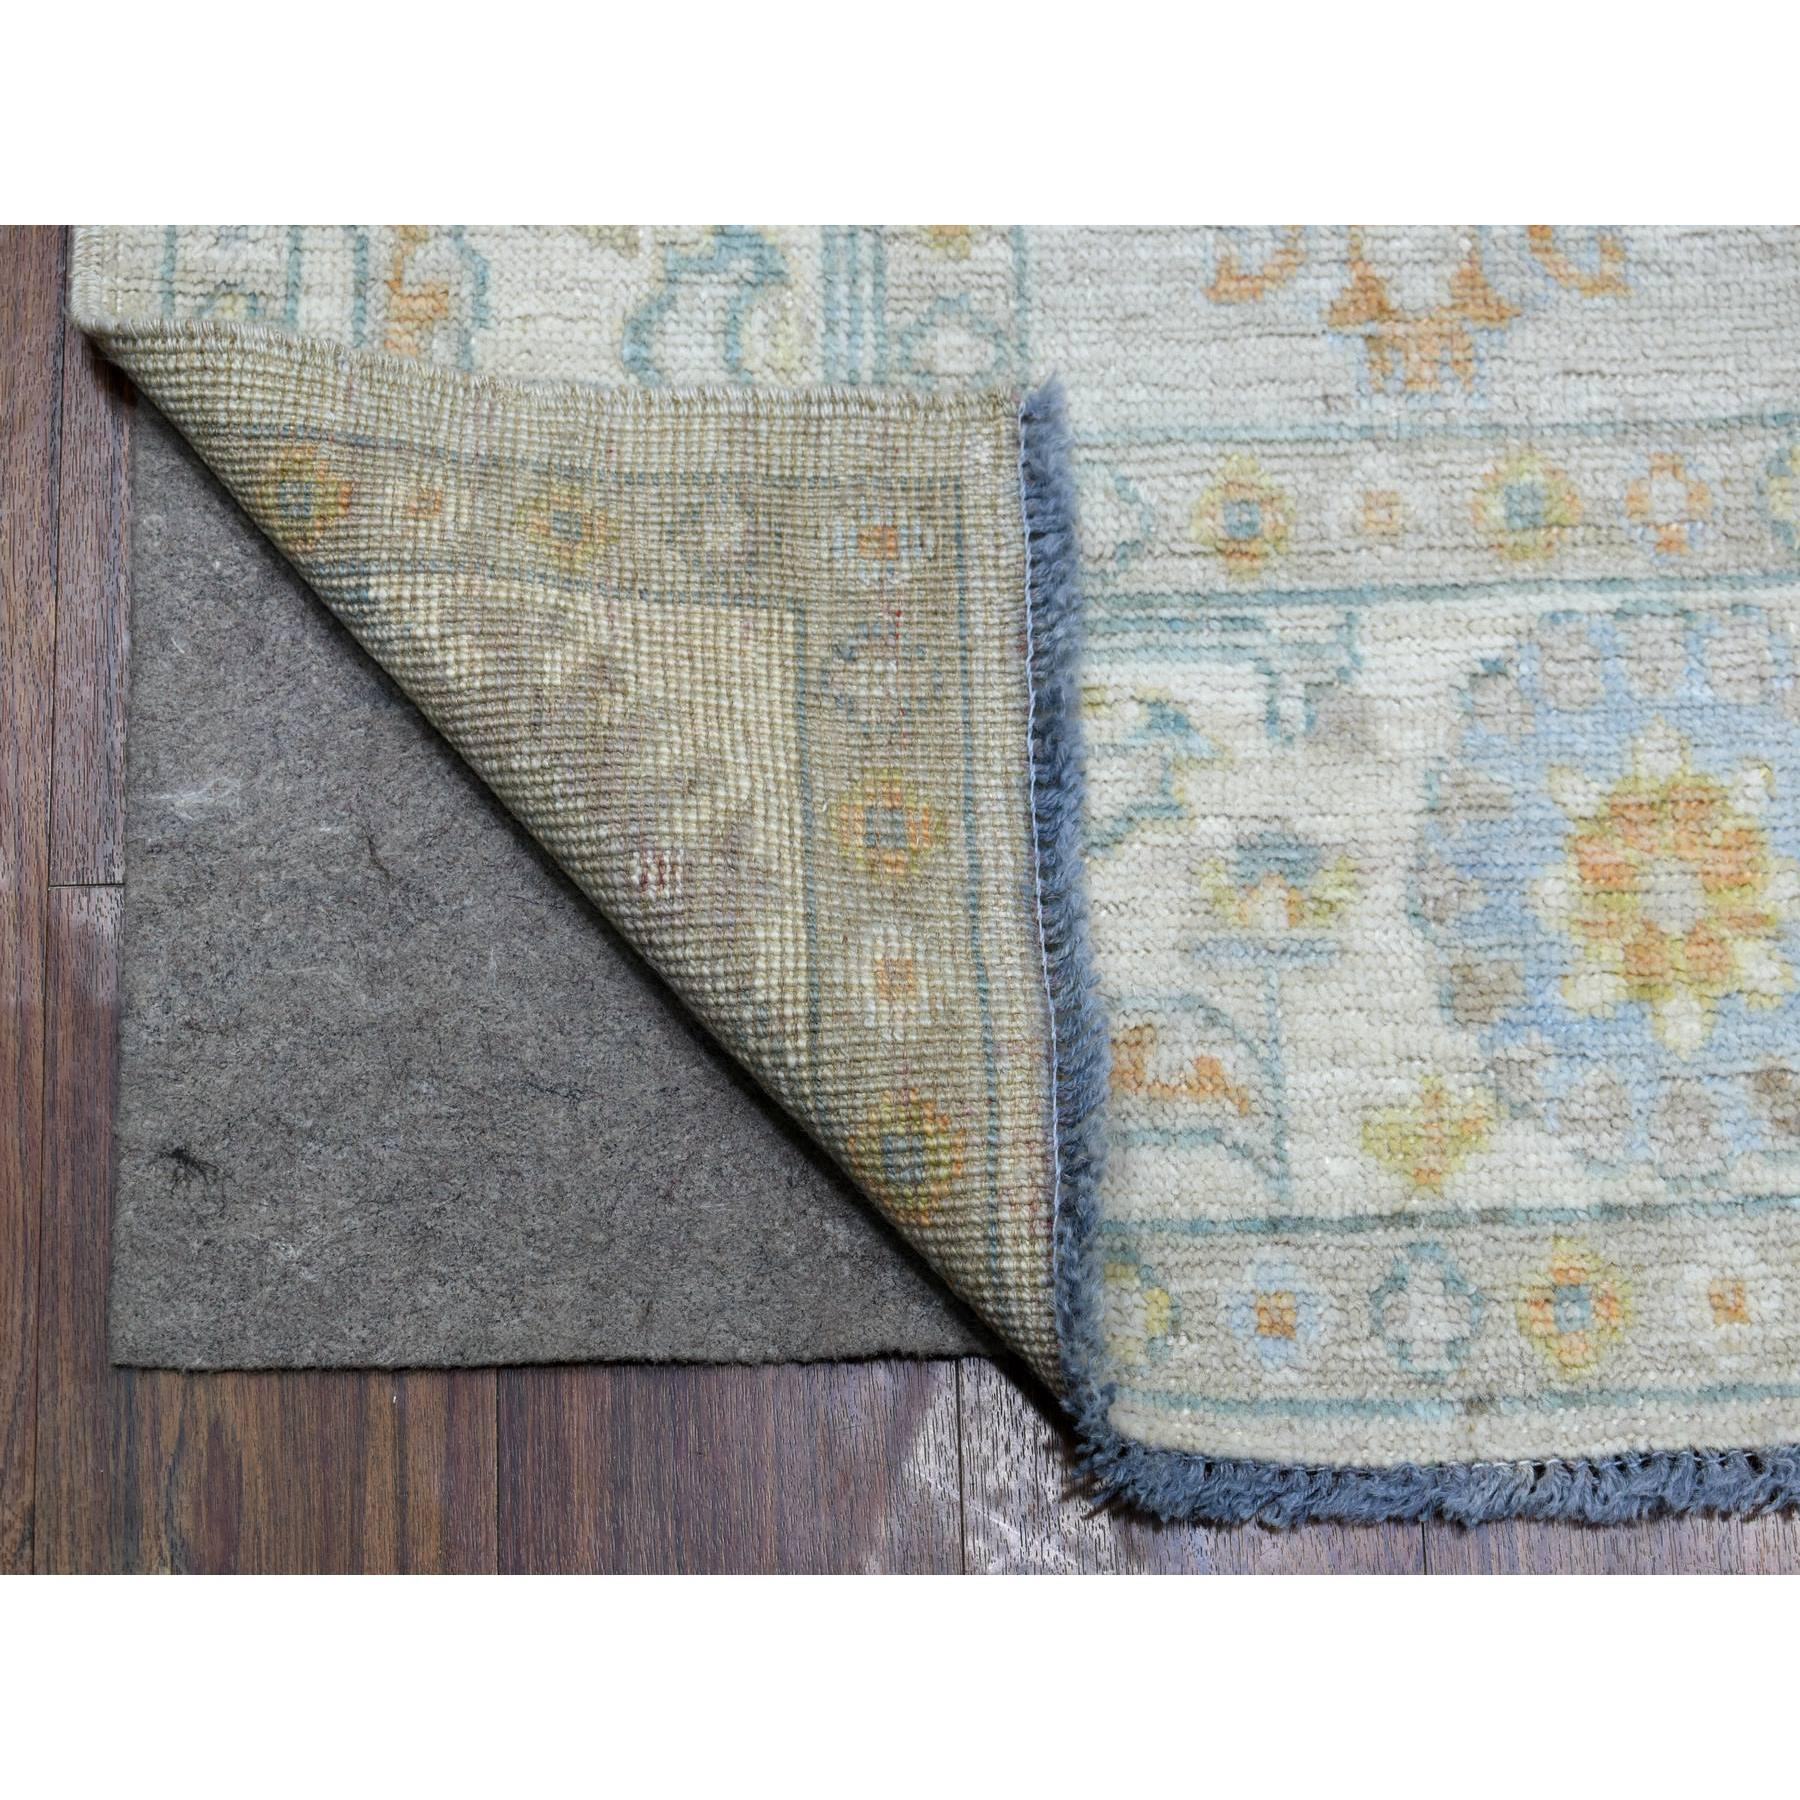 6'x9' Gray Angora Ushak with Assortment of Colors Extra Soft Wool Hand Woven Oriental Rug 